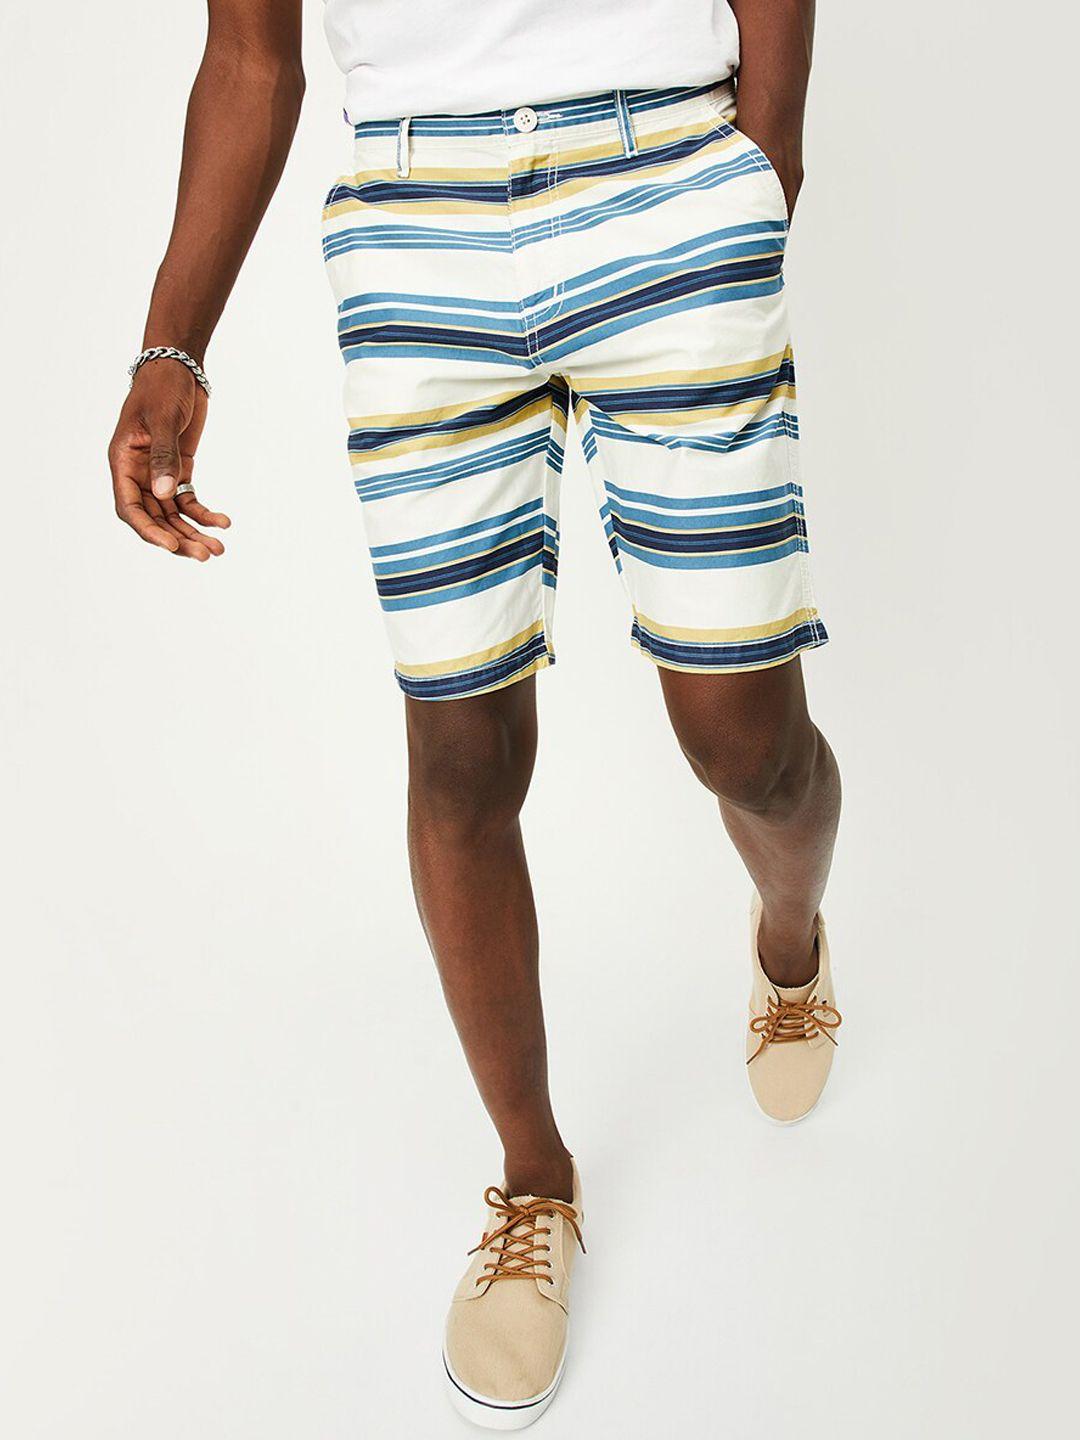 max-men-striped-above-knee-length-pure-cotton-chino-shorts